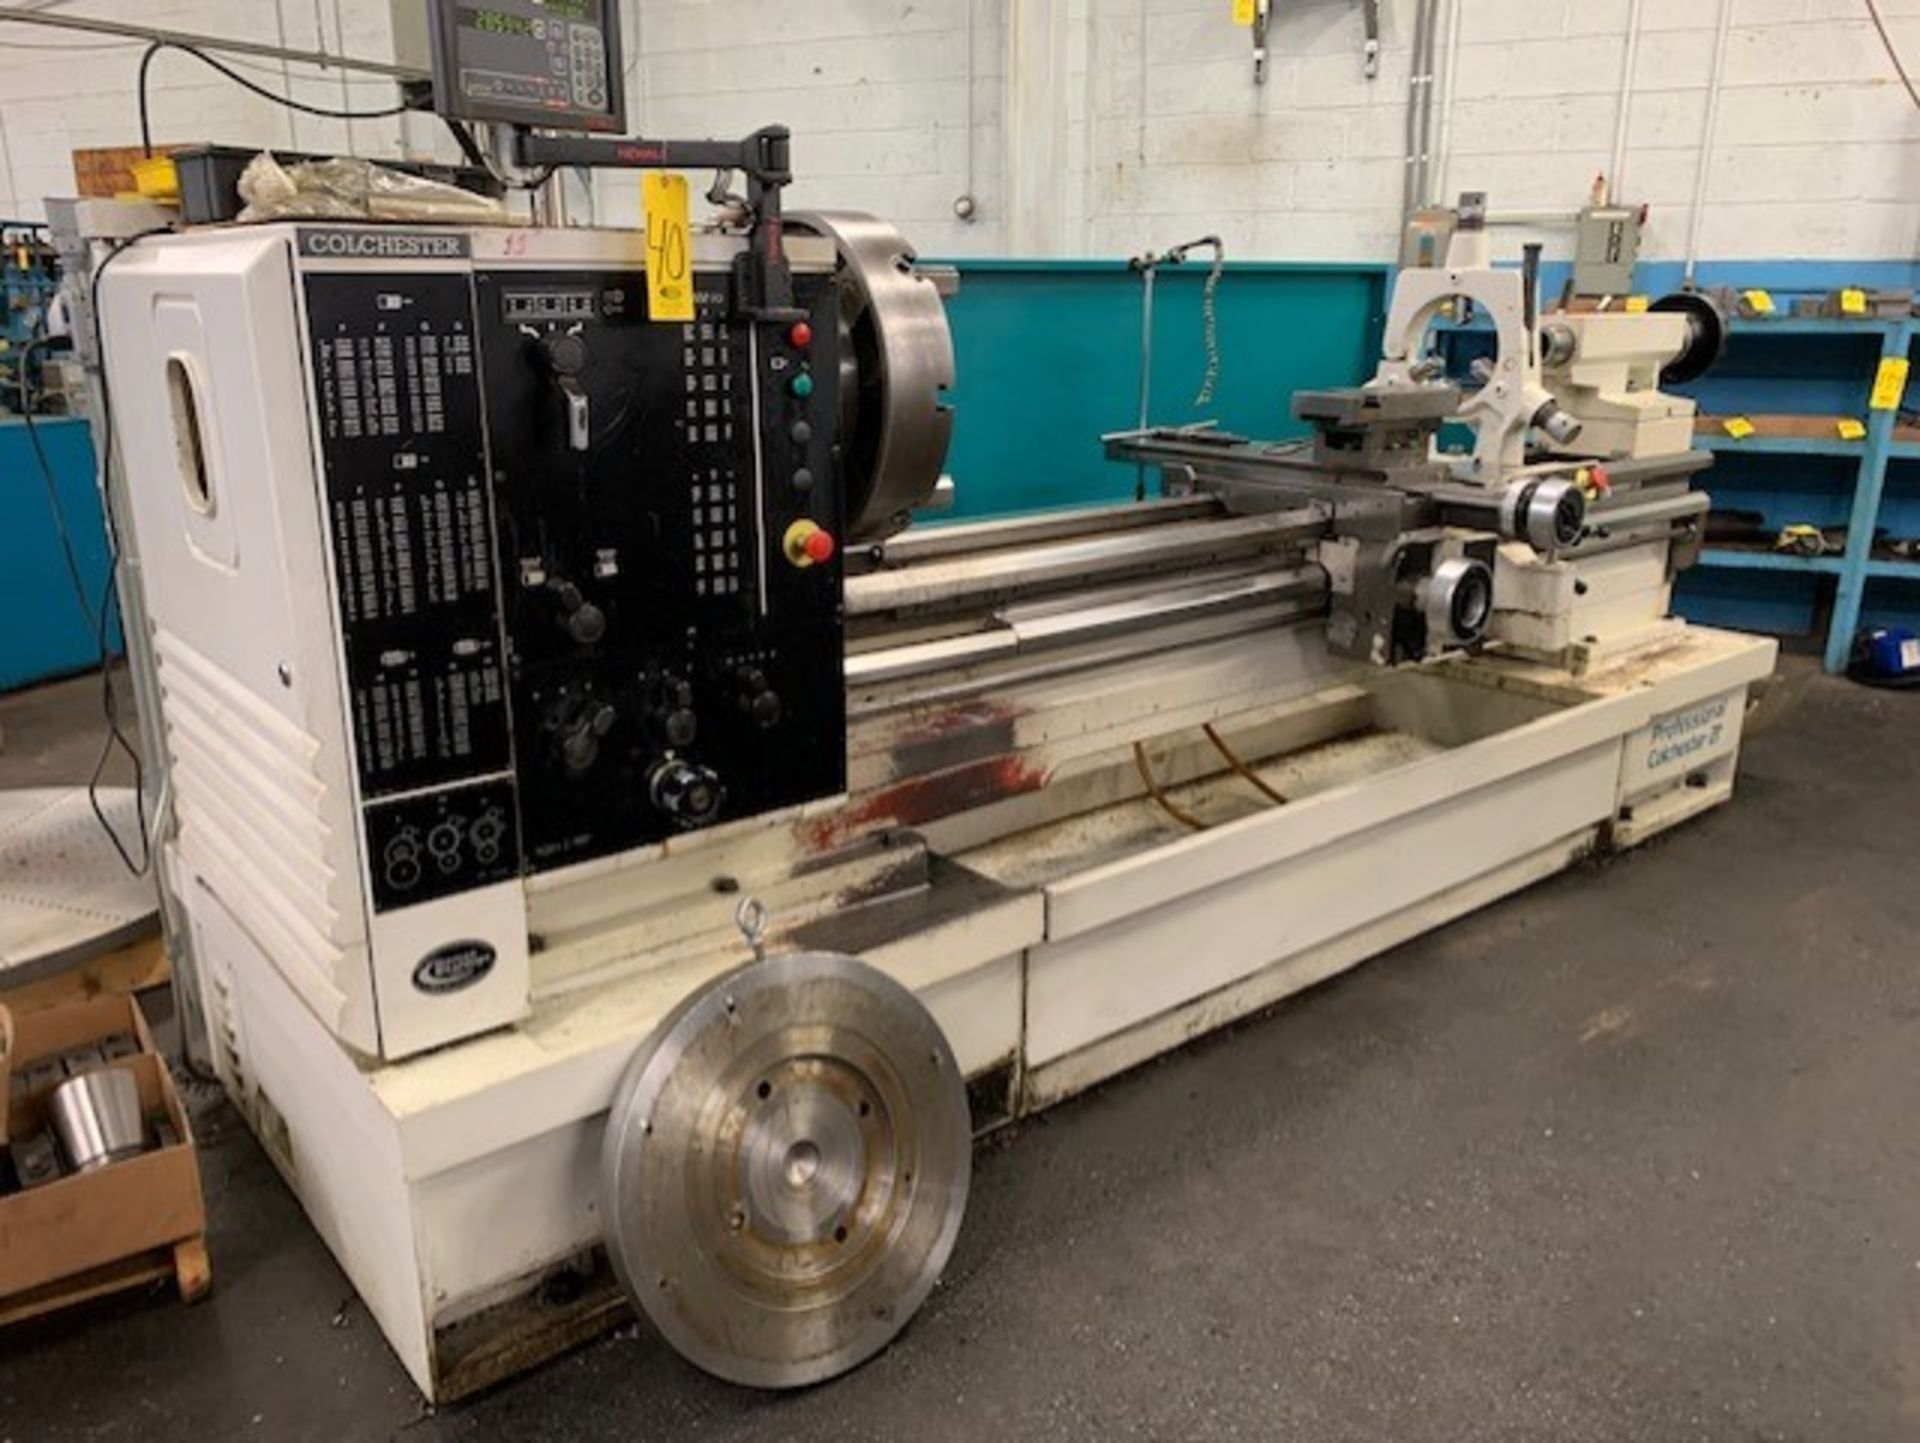 2014 CLAUSING COLCHESTER 8116 VSJ 600 GROUP PROFESSIONAL GAP BED ENGINE LATHE...